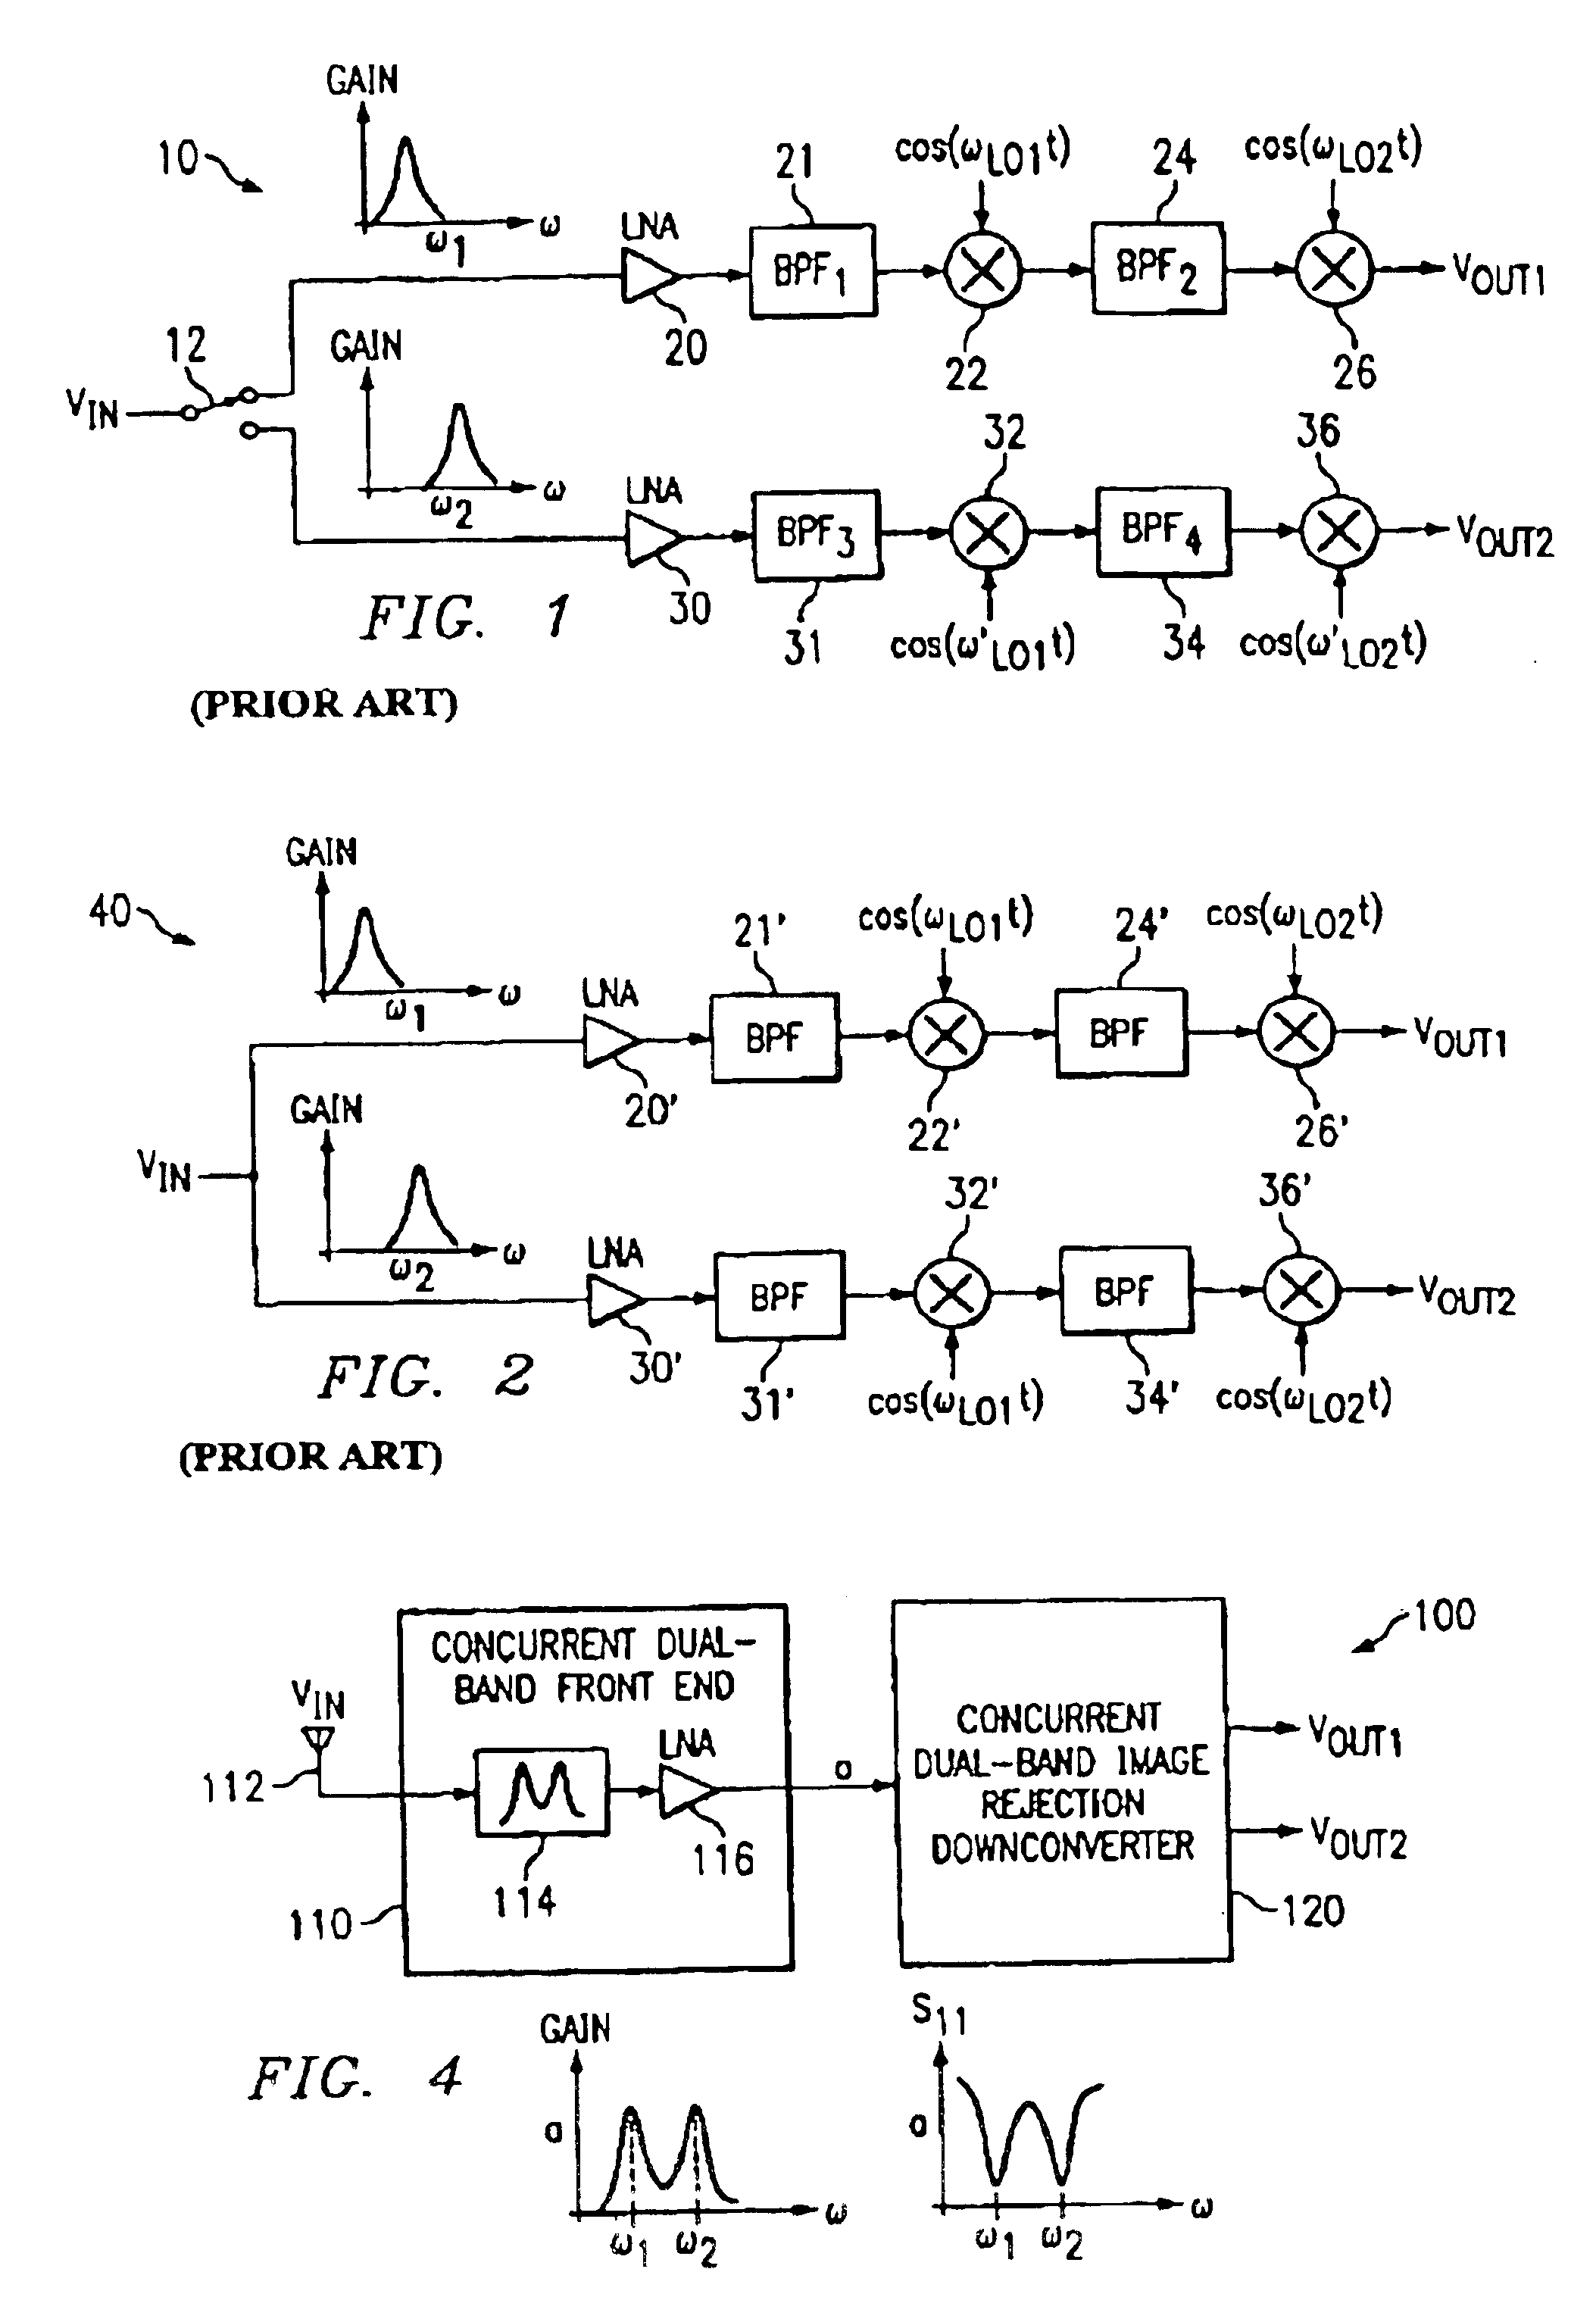 Concurrent dual-band receiver architecture